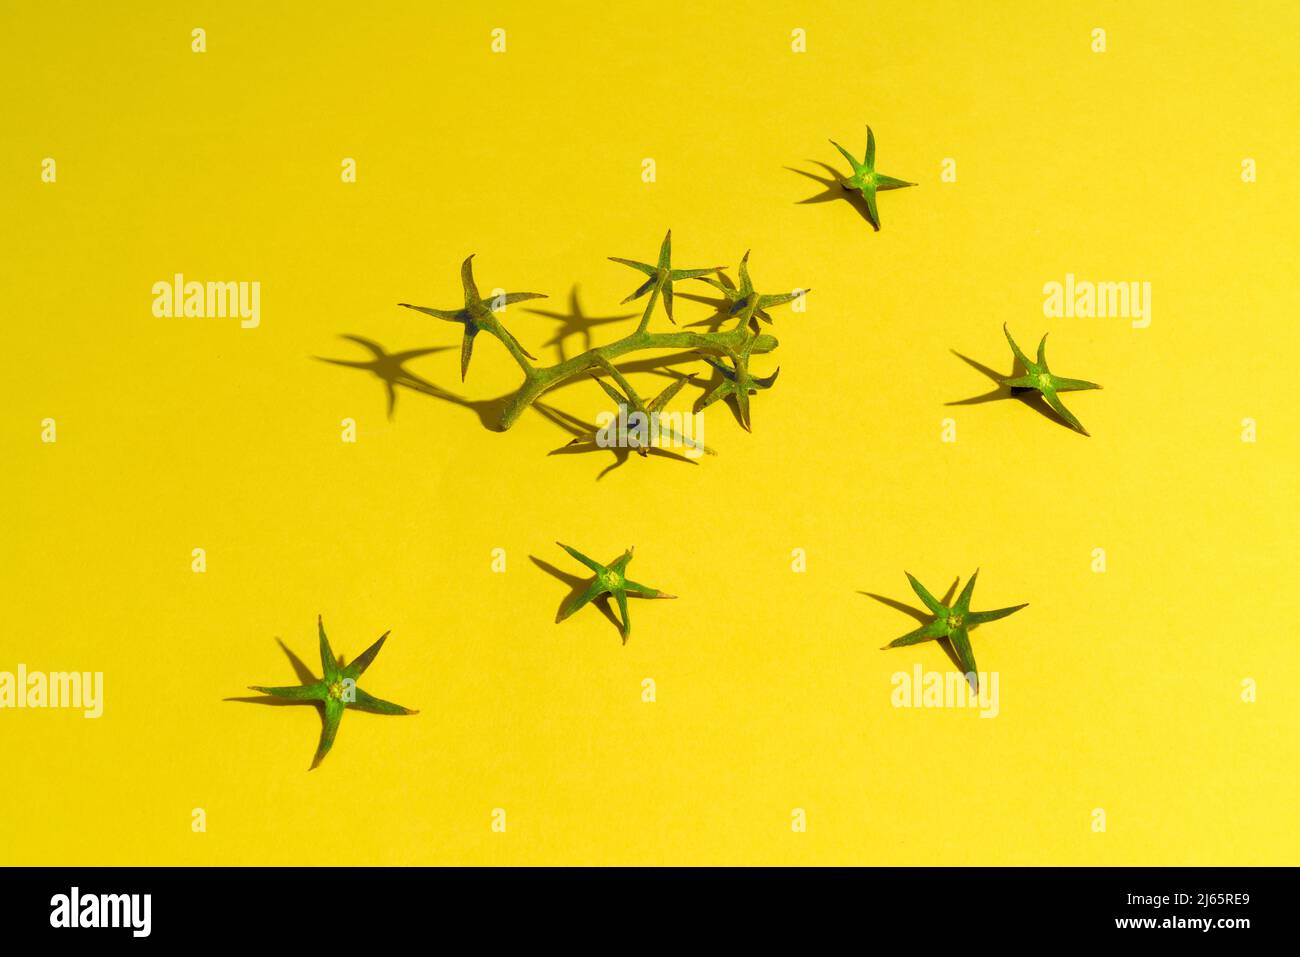 The Stem of a Tomato on Yellow Background with Leafstalks like Stars Stock Photo